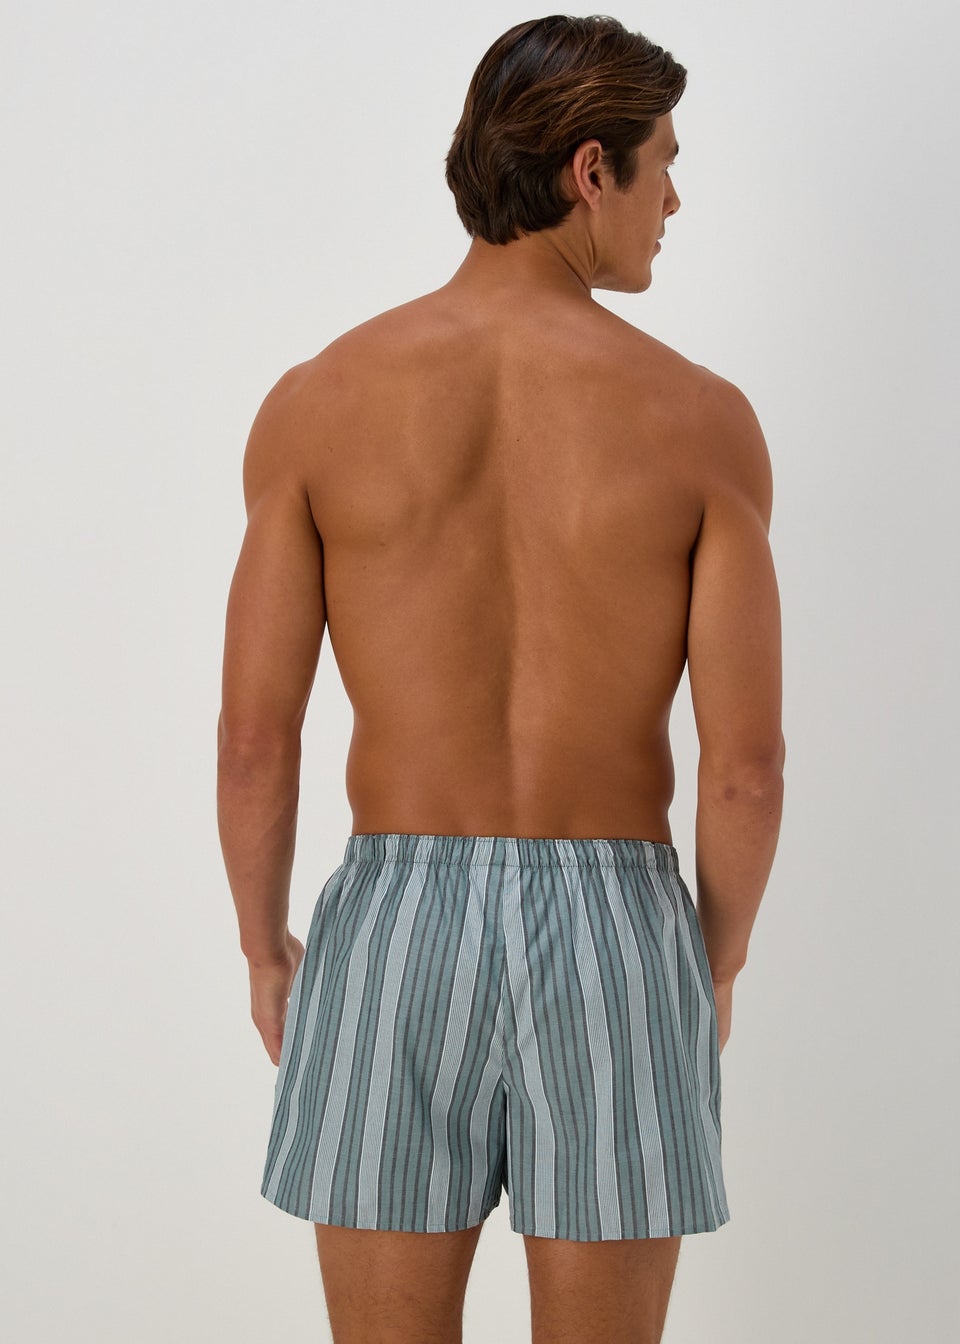 Woven Striped Boxers